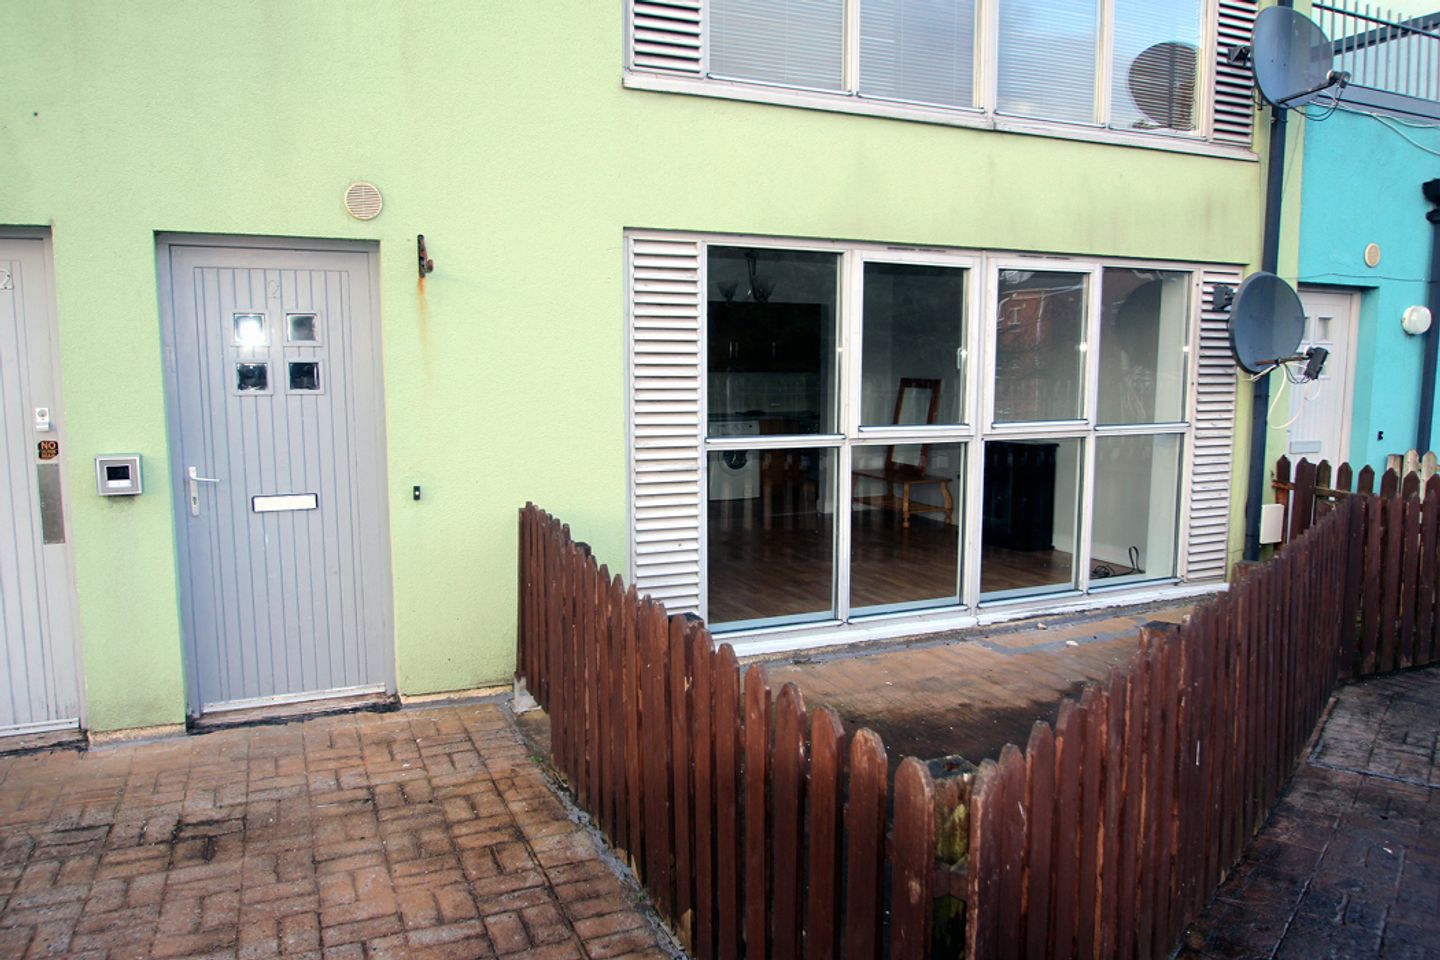 Apartment 2, Block 4, Tullamore, Co. Offaly